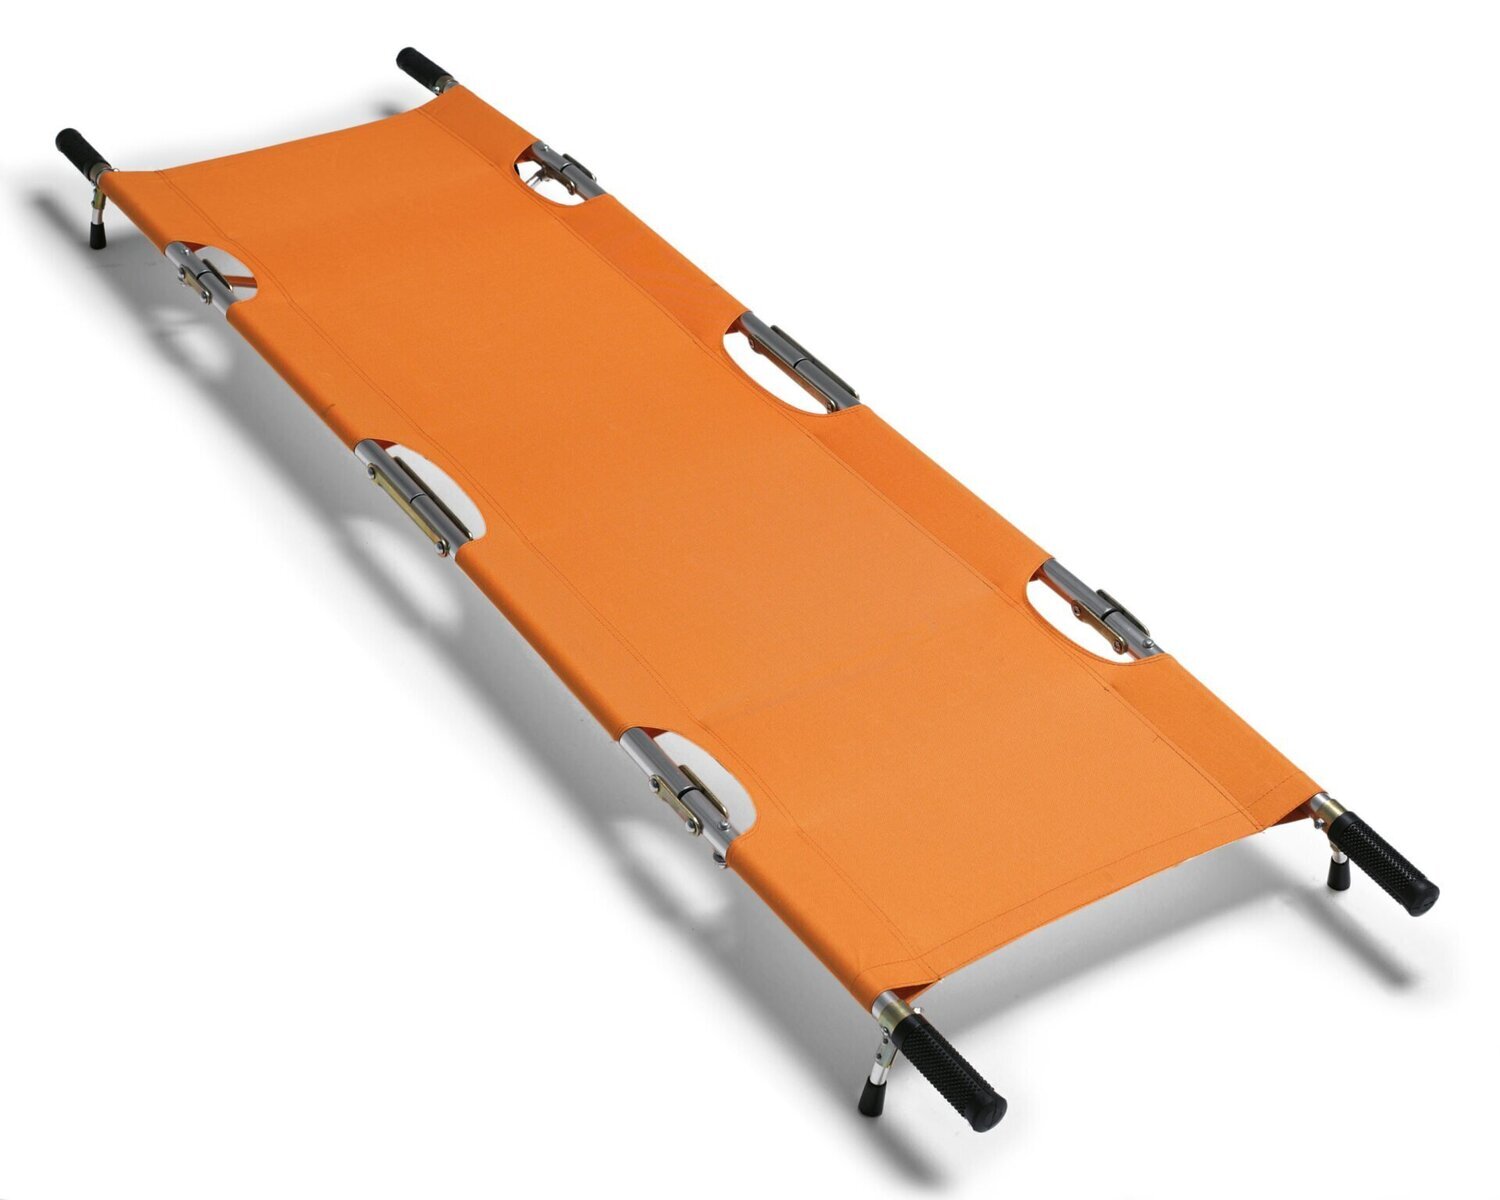 Folding recovery stretcher both in width and length